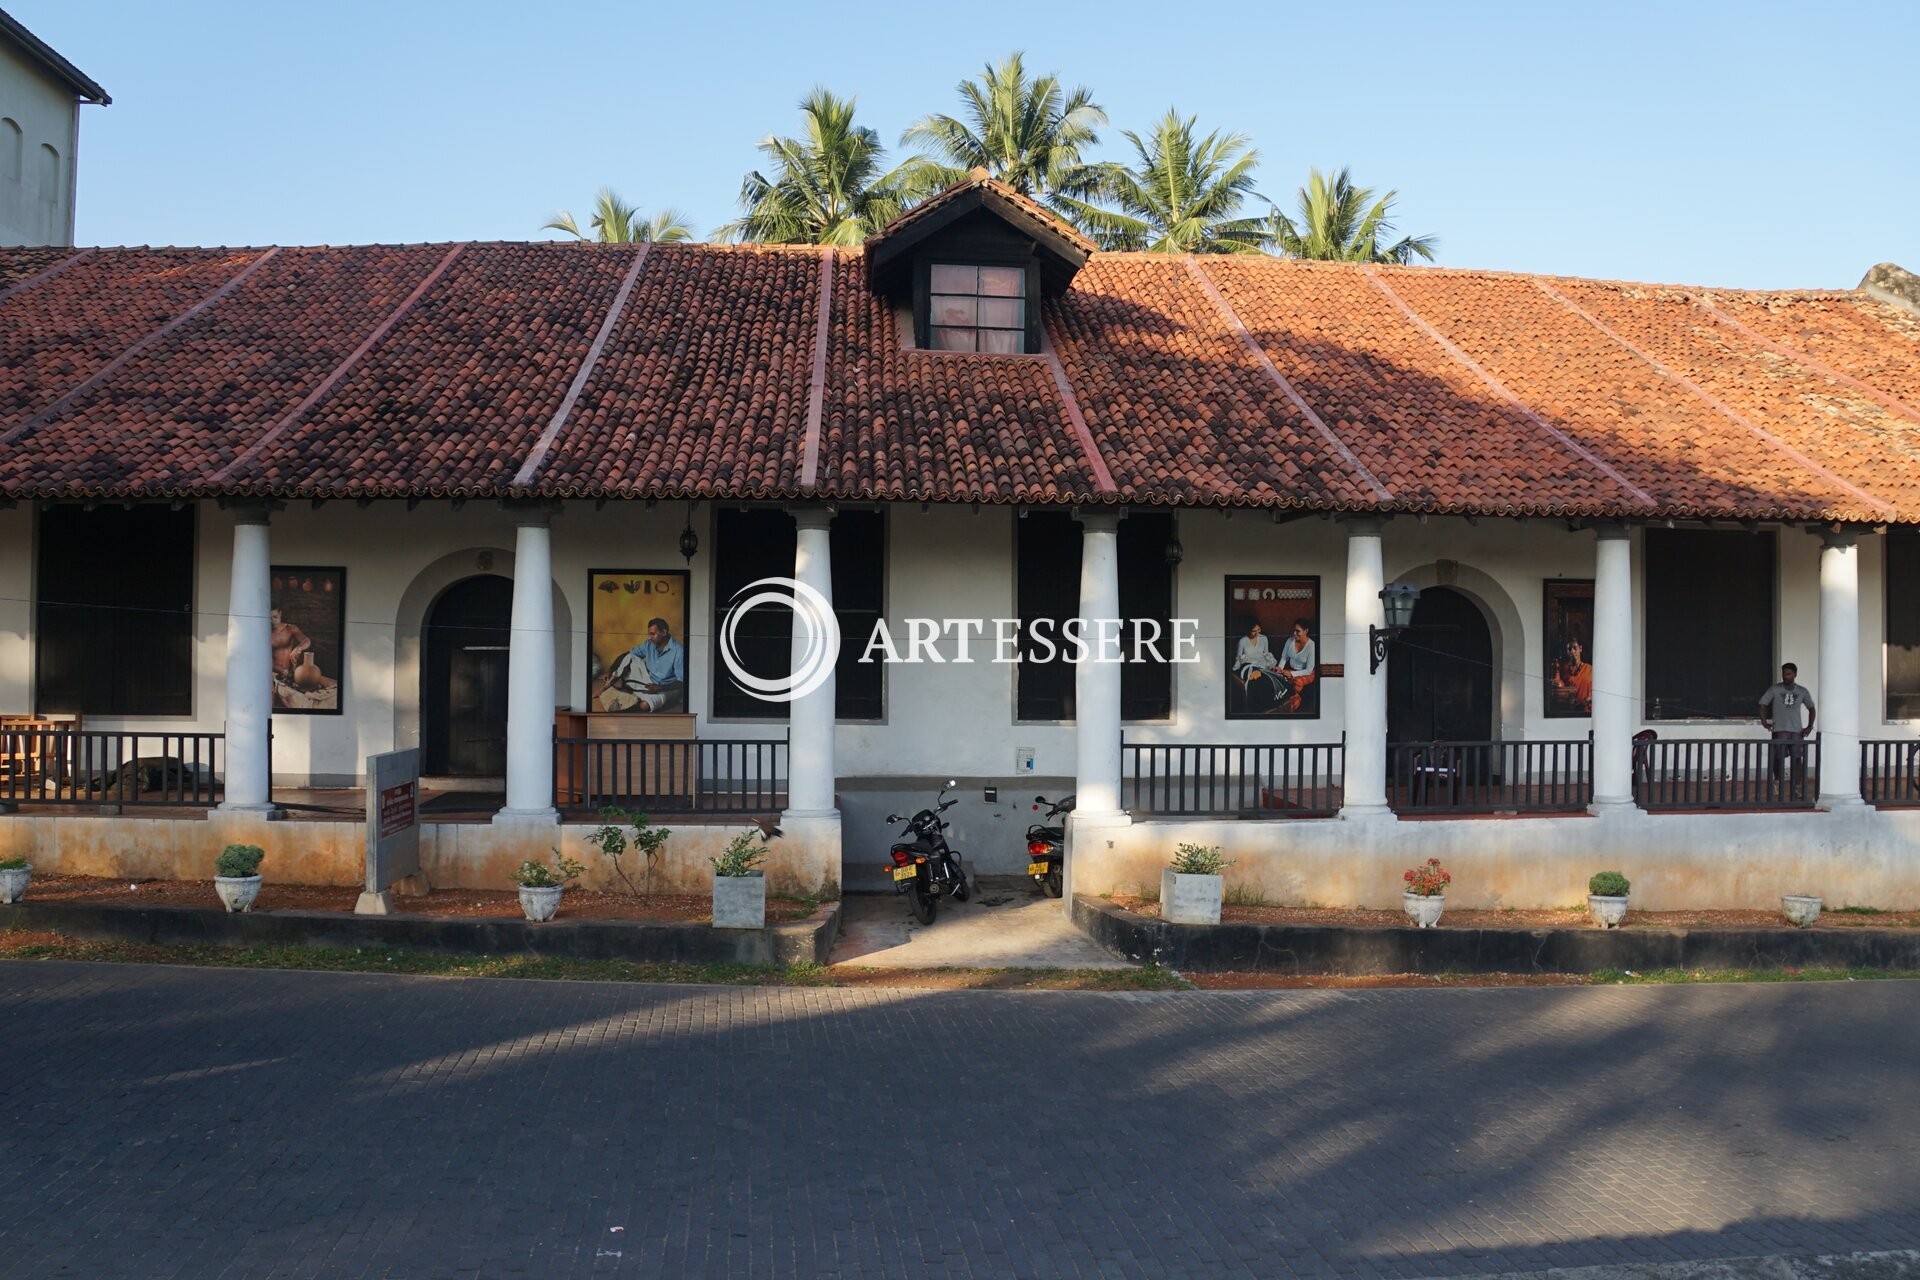 Galle National Museum